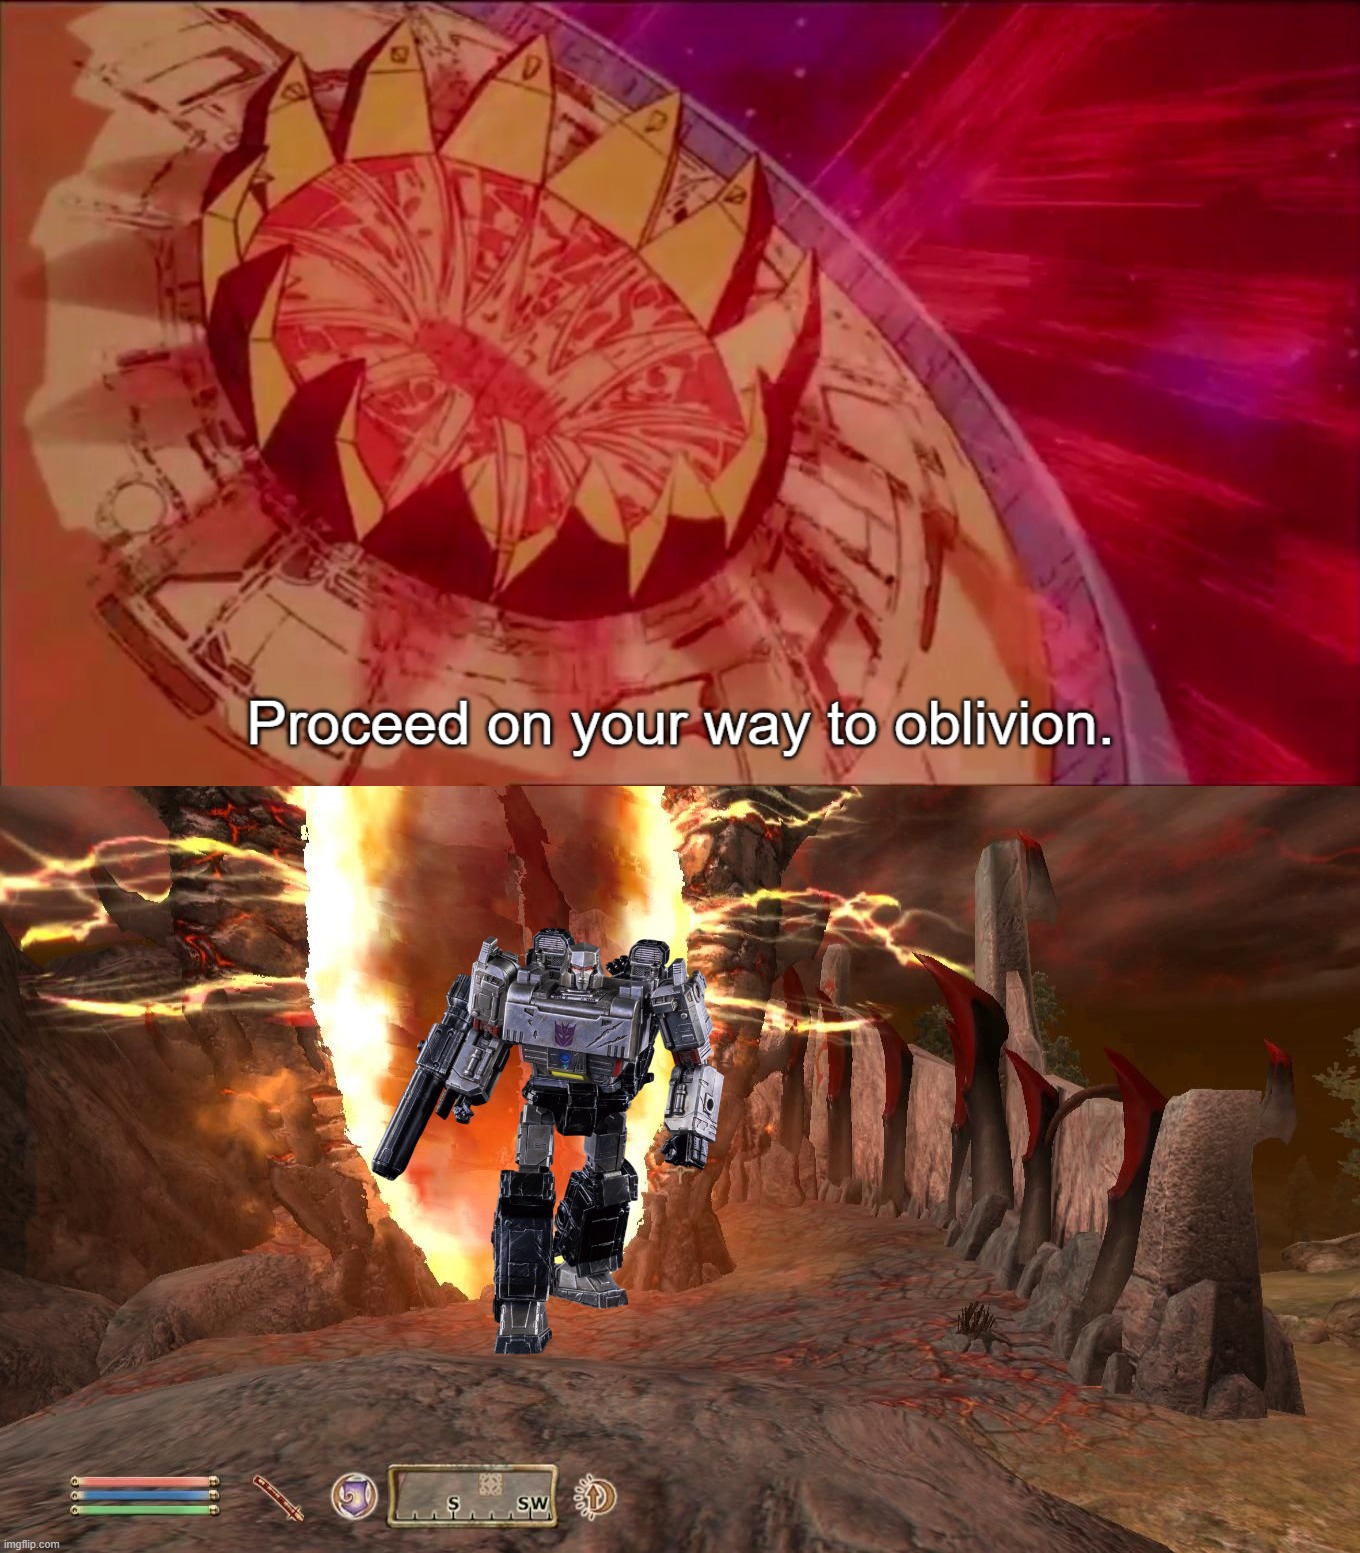 image tagged in proceed on your way to oblivion,elder scrolls,oblivion,megatron,unicron | made w/ Imgflip meme maker